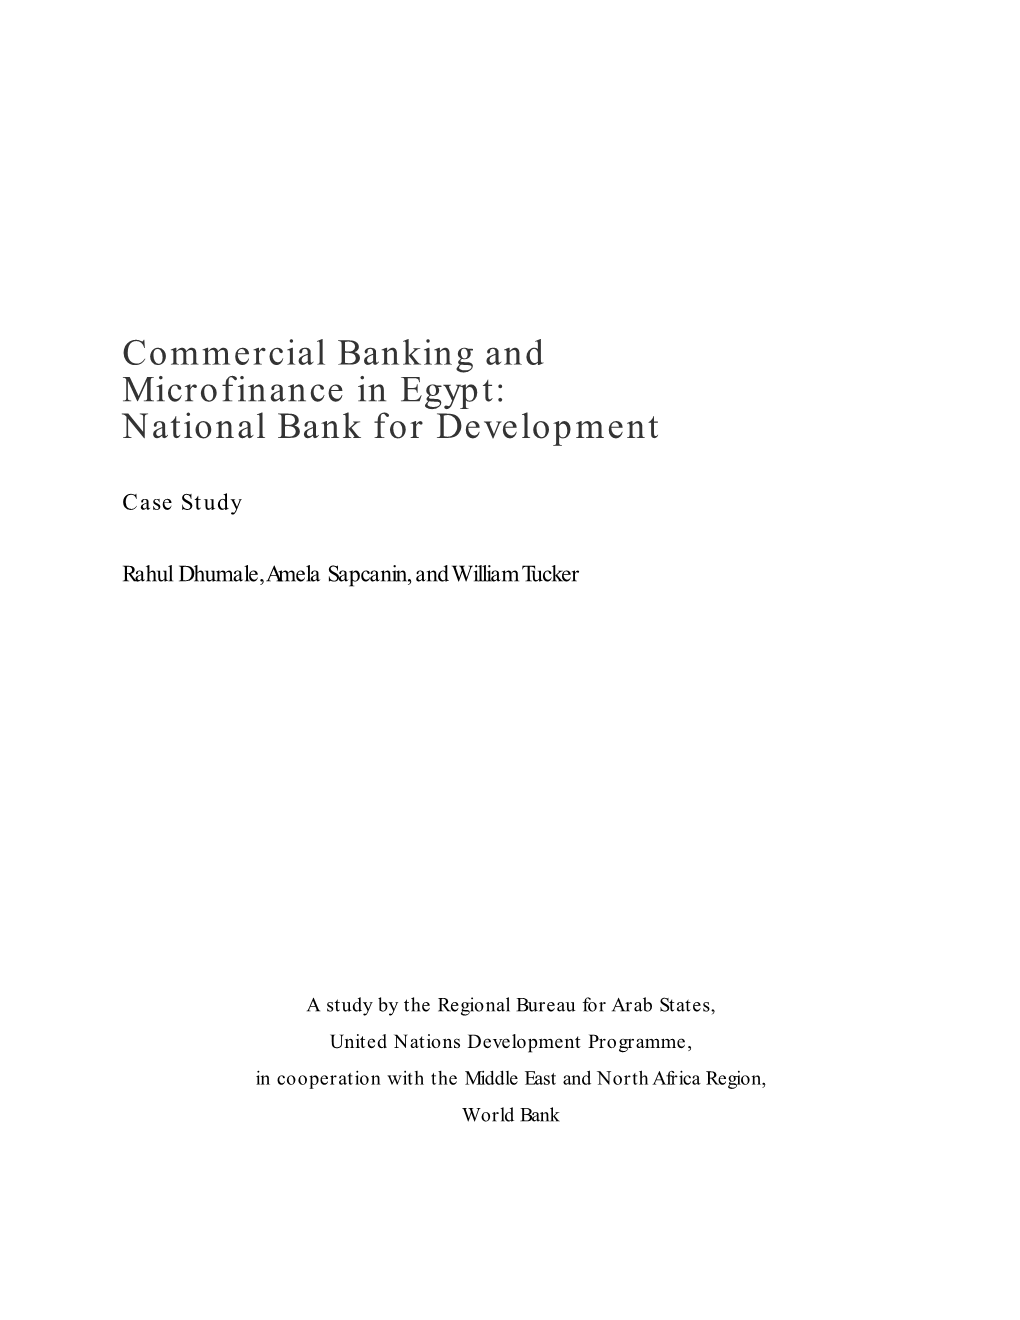 Commercial Banking and Microfinance in Egypt: National Bank for Development